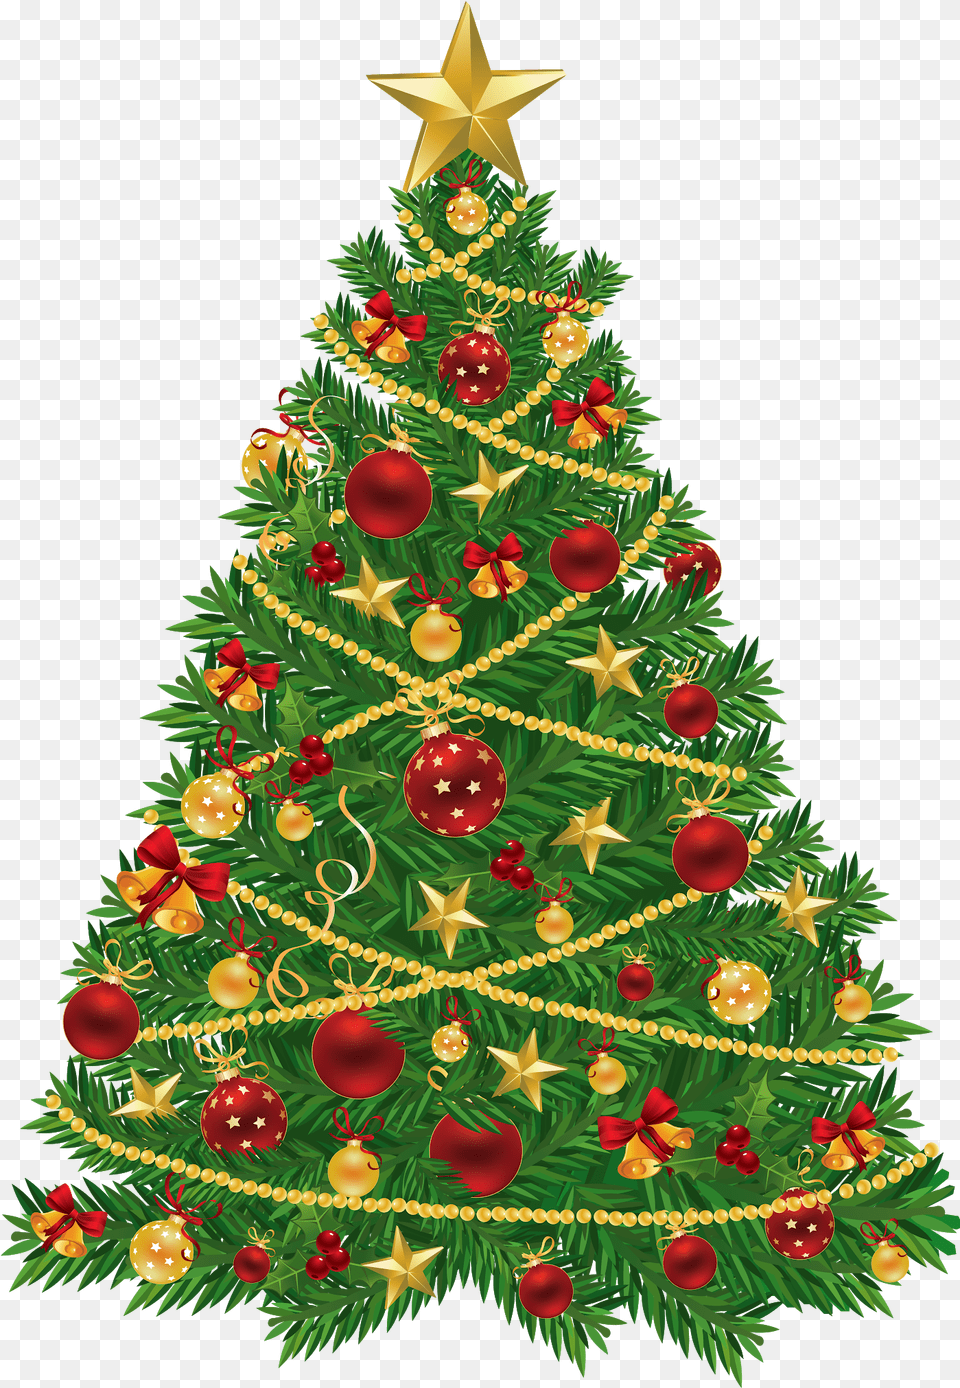 Christmas Bow Christmas Tree Transparent Hd Download Clipart Transparent Background Christmas Tree, Christmas Decorations, Festival, Plant, Christmas Tree Free Png